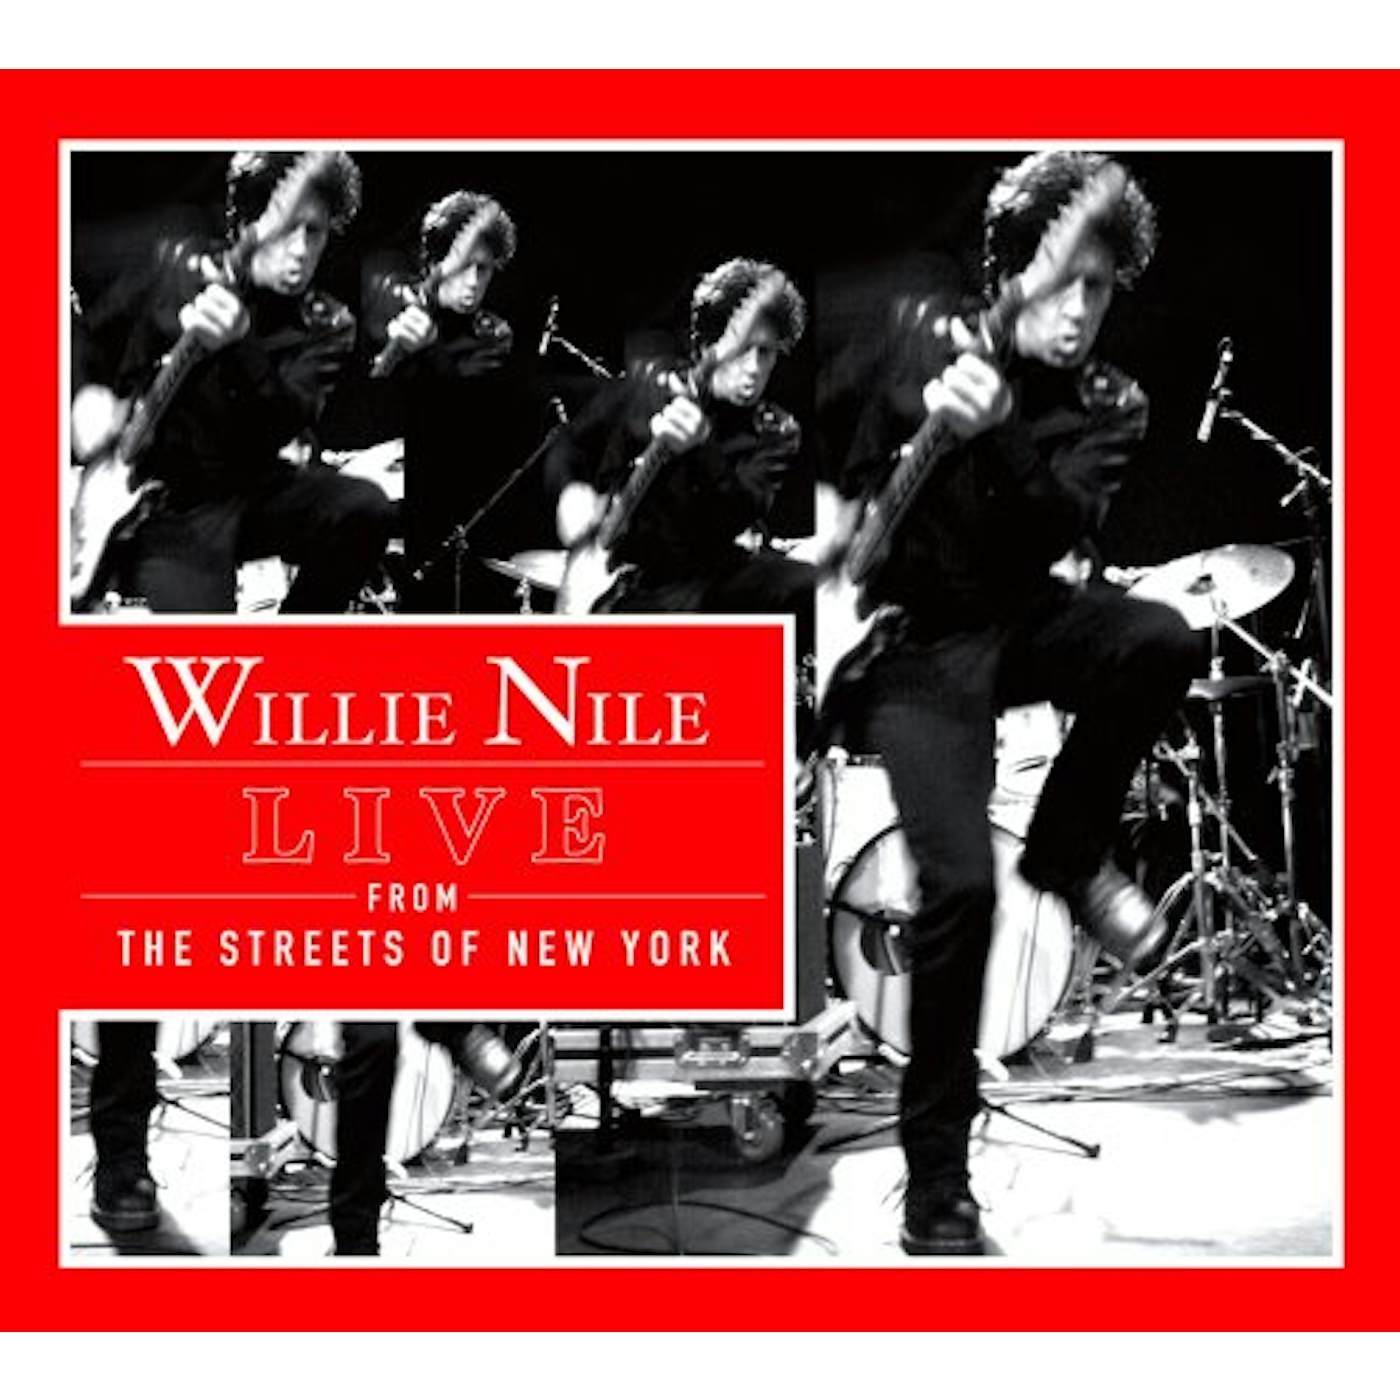 Willie Nile LIVE FROM THE STREETS OF NEW YORK CD